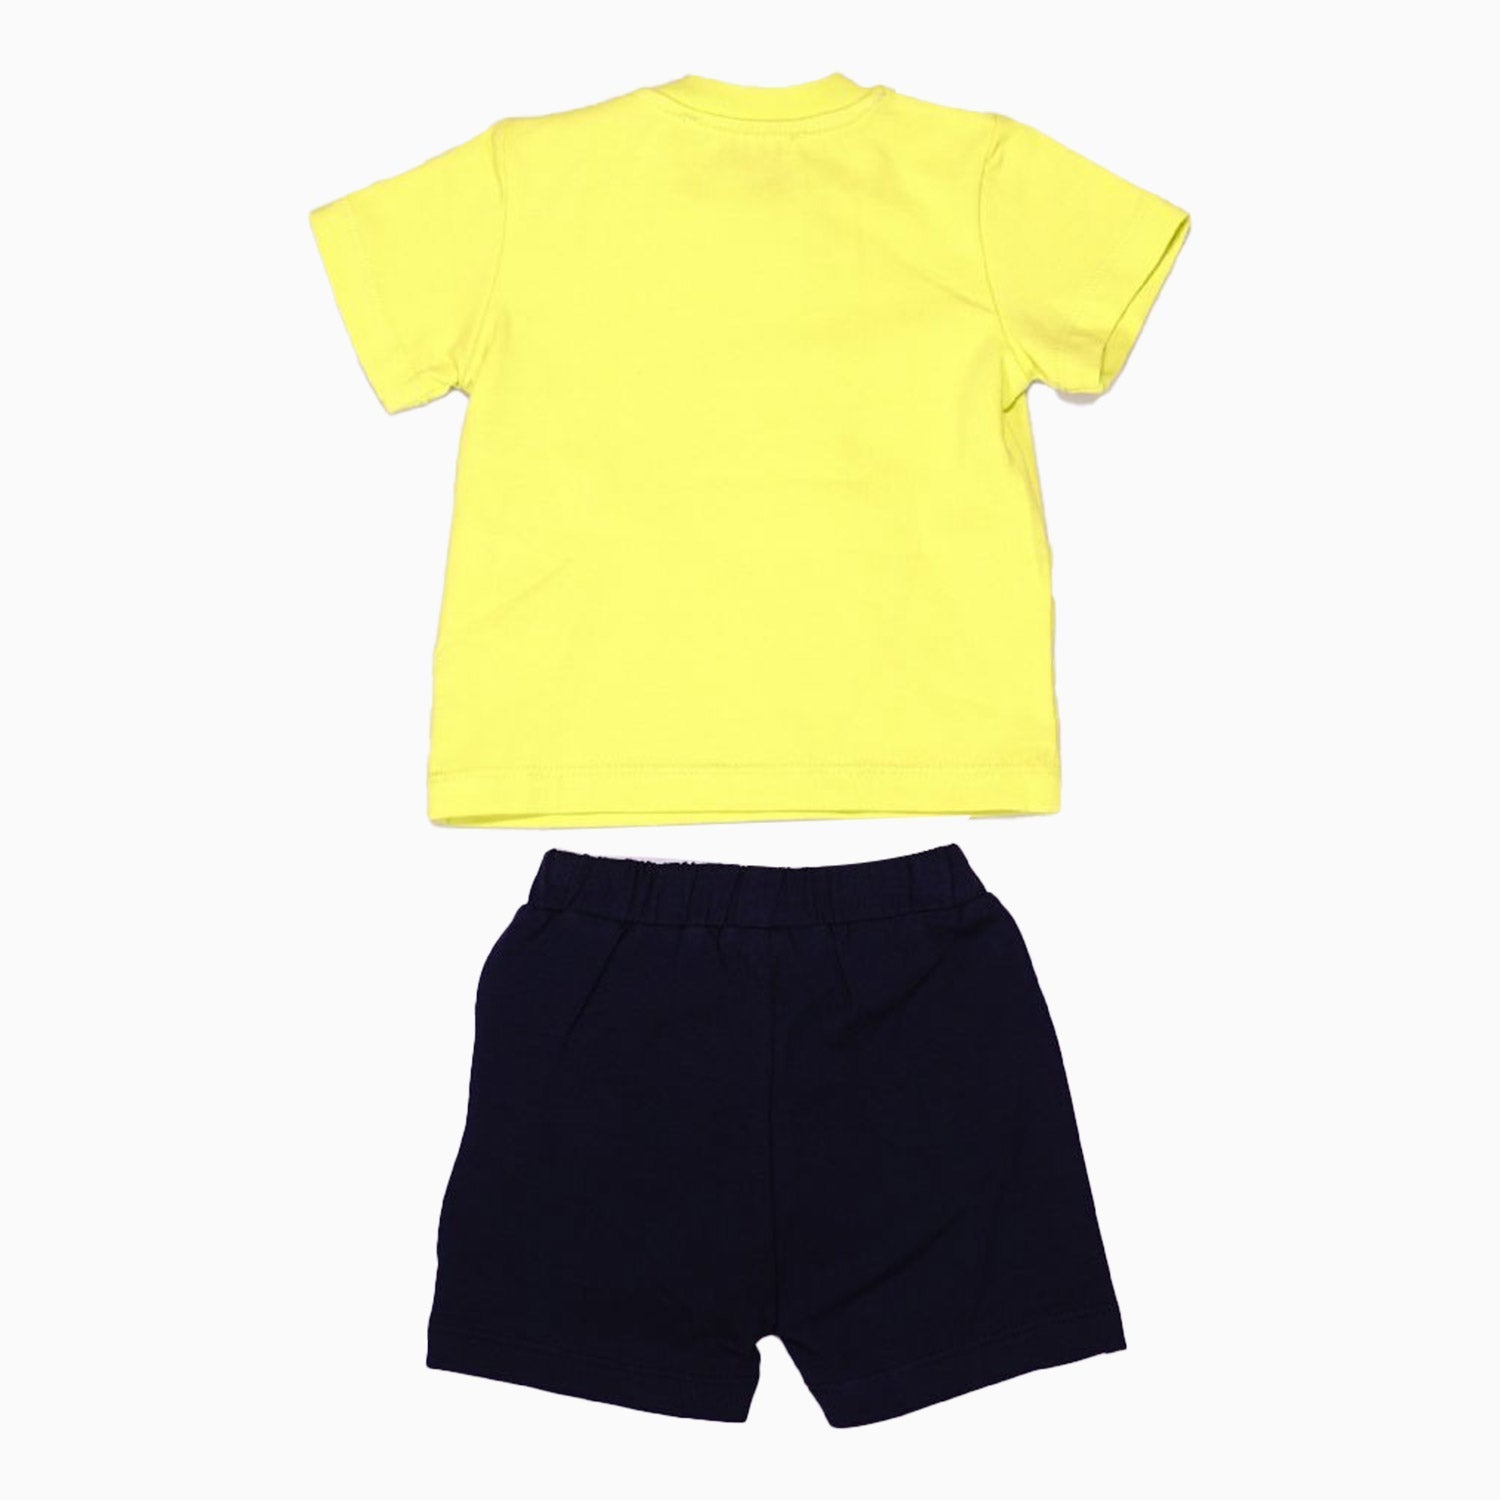 Iceberg Kid's Completo In Jersey Outfit Infants - Color: Lime - Kids Premium Clothing -